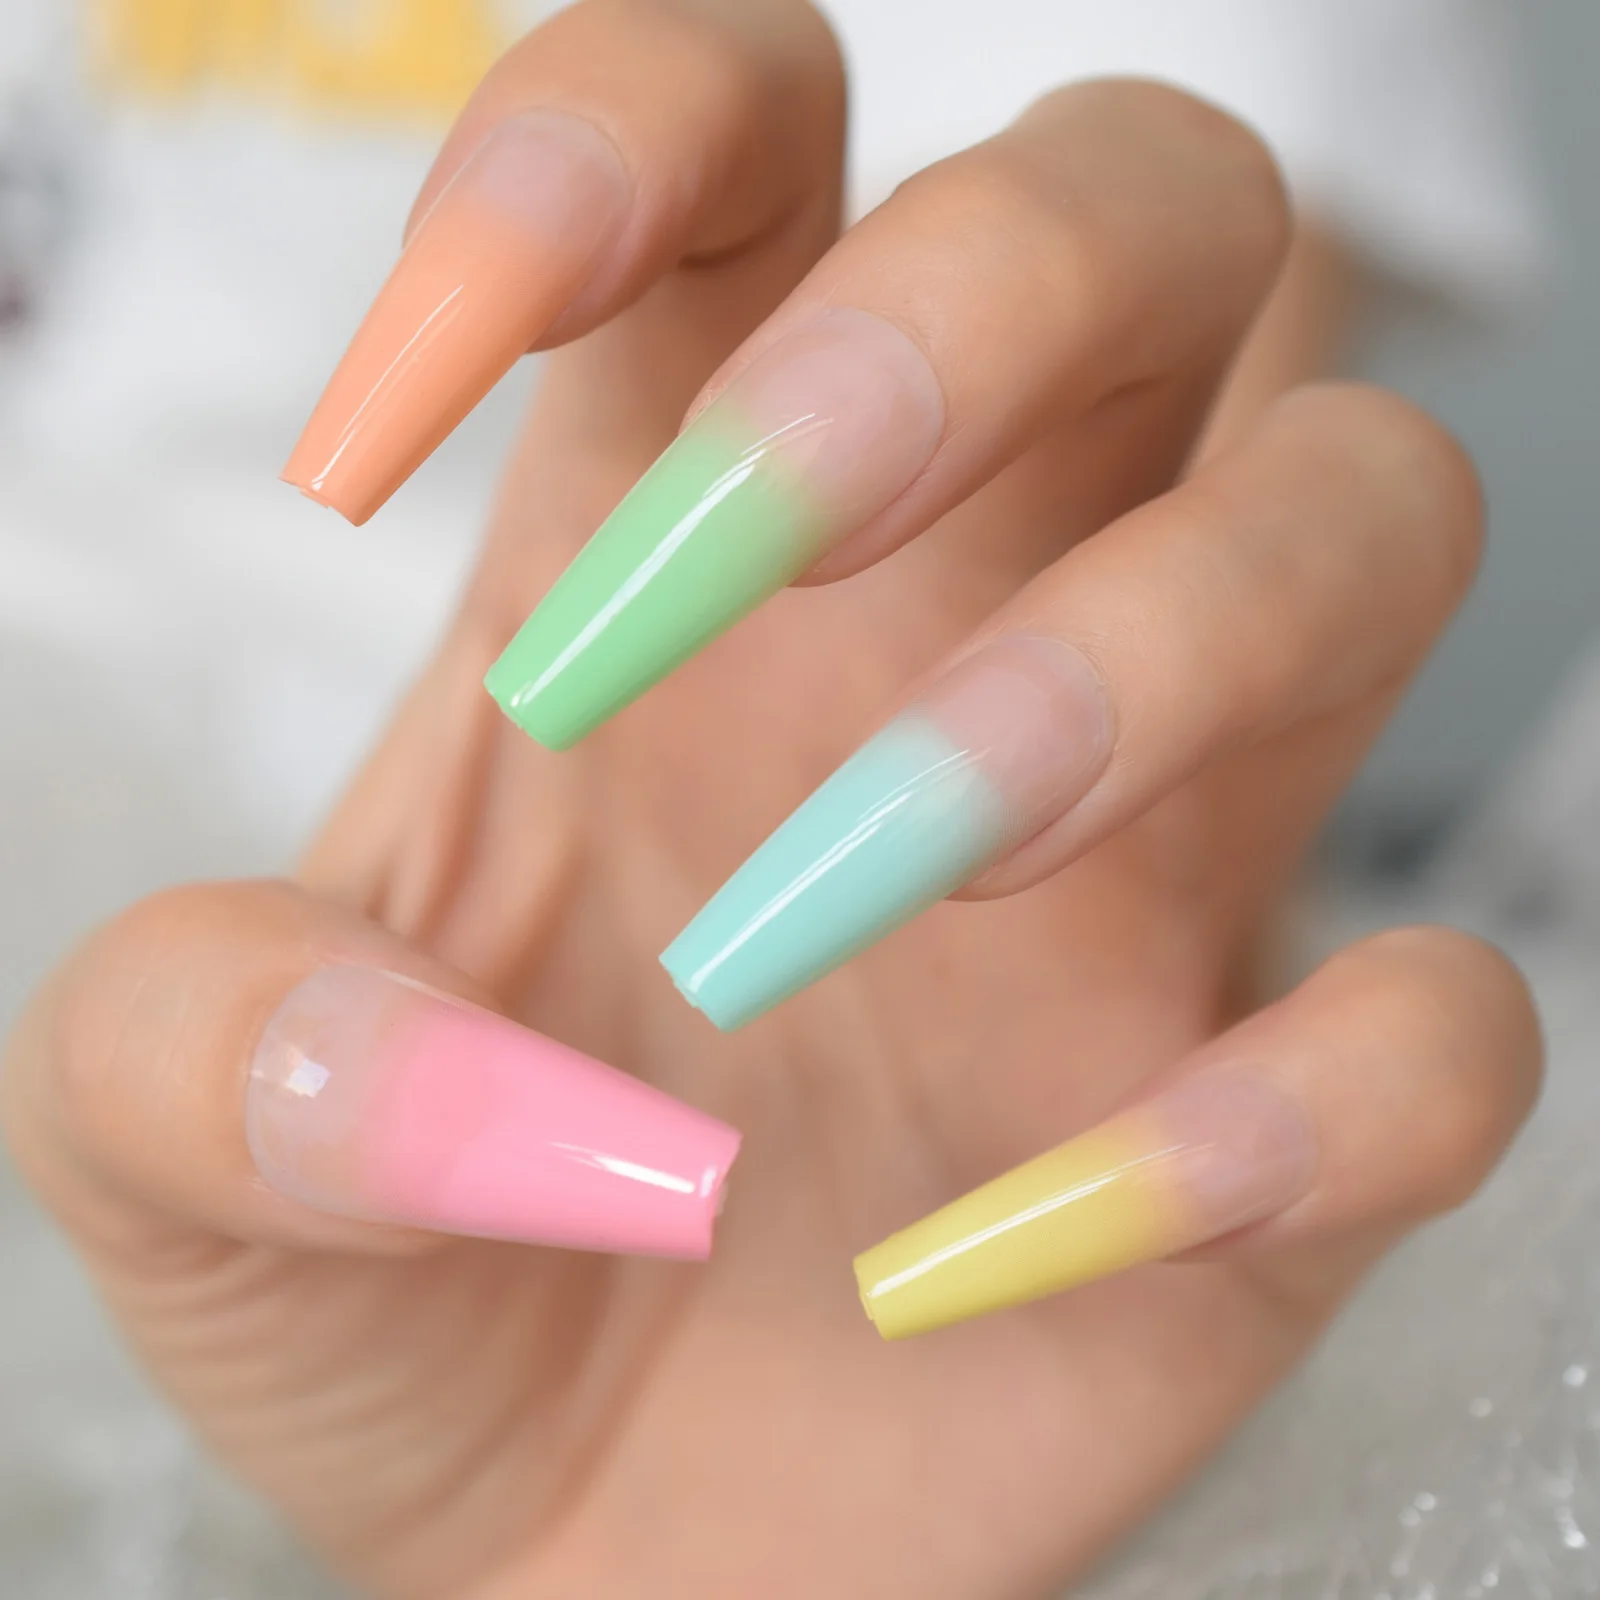 On Nails Ballet Candy Rainbow Fake Nails Set Glossy Gel Shine Nude Ombre French Acrylic Nail